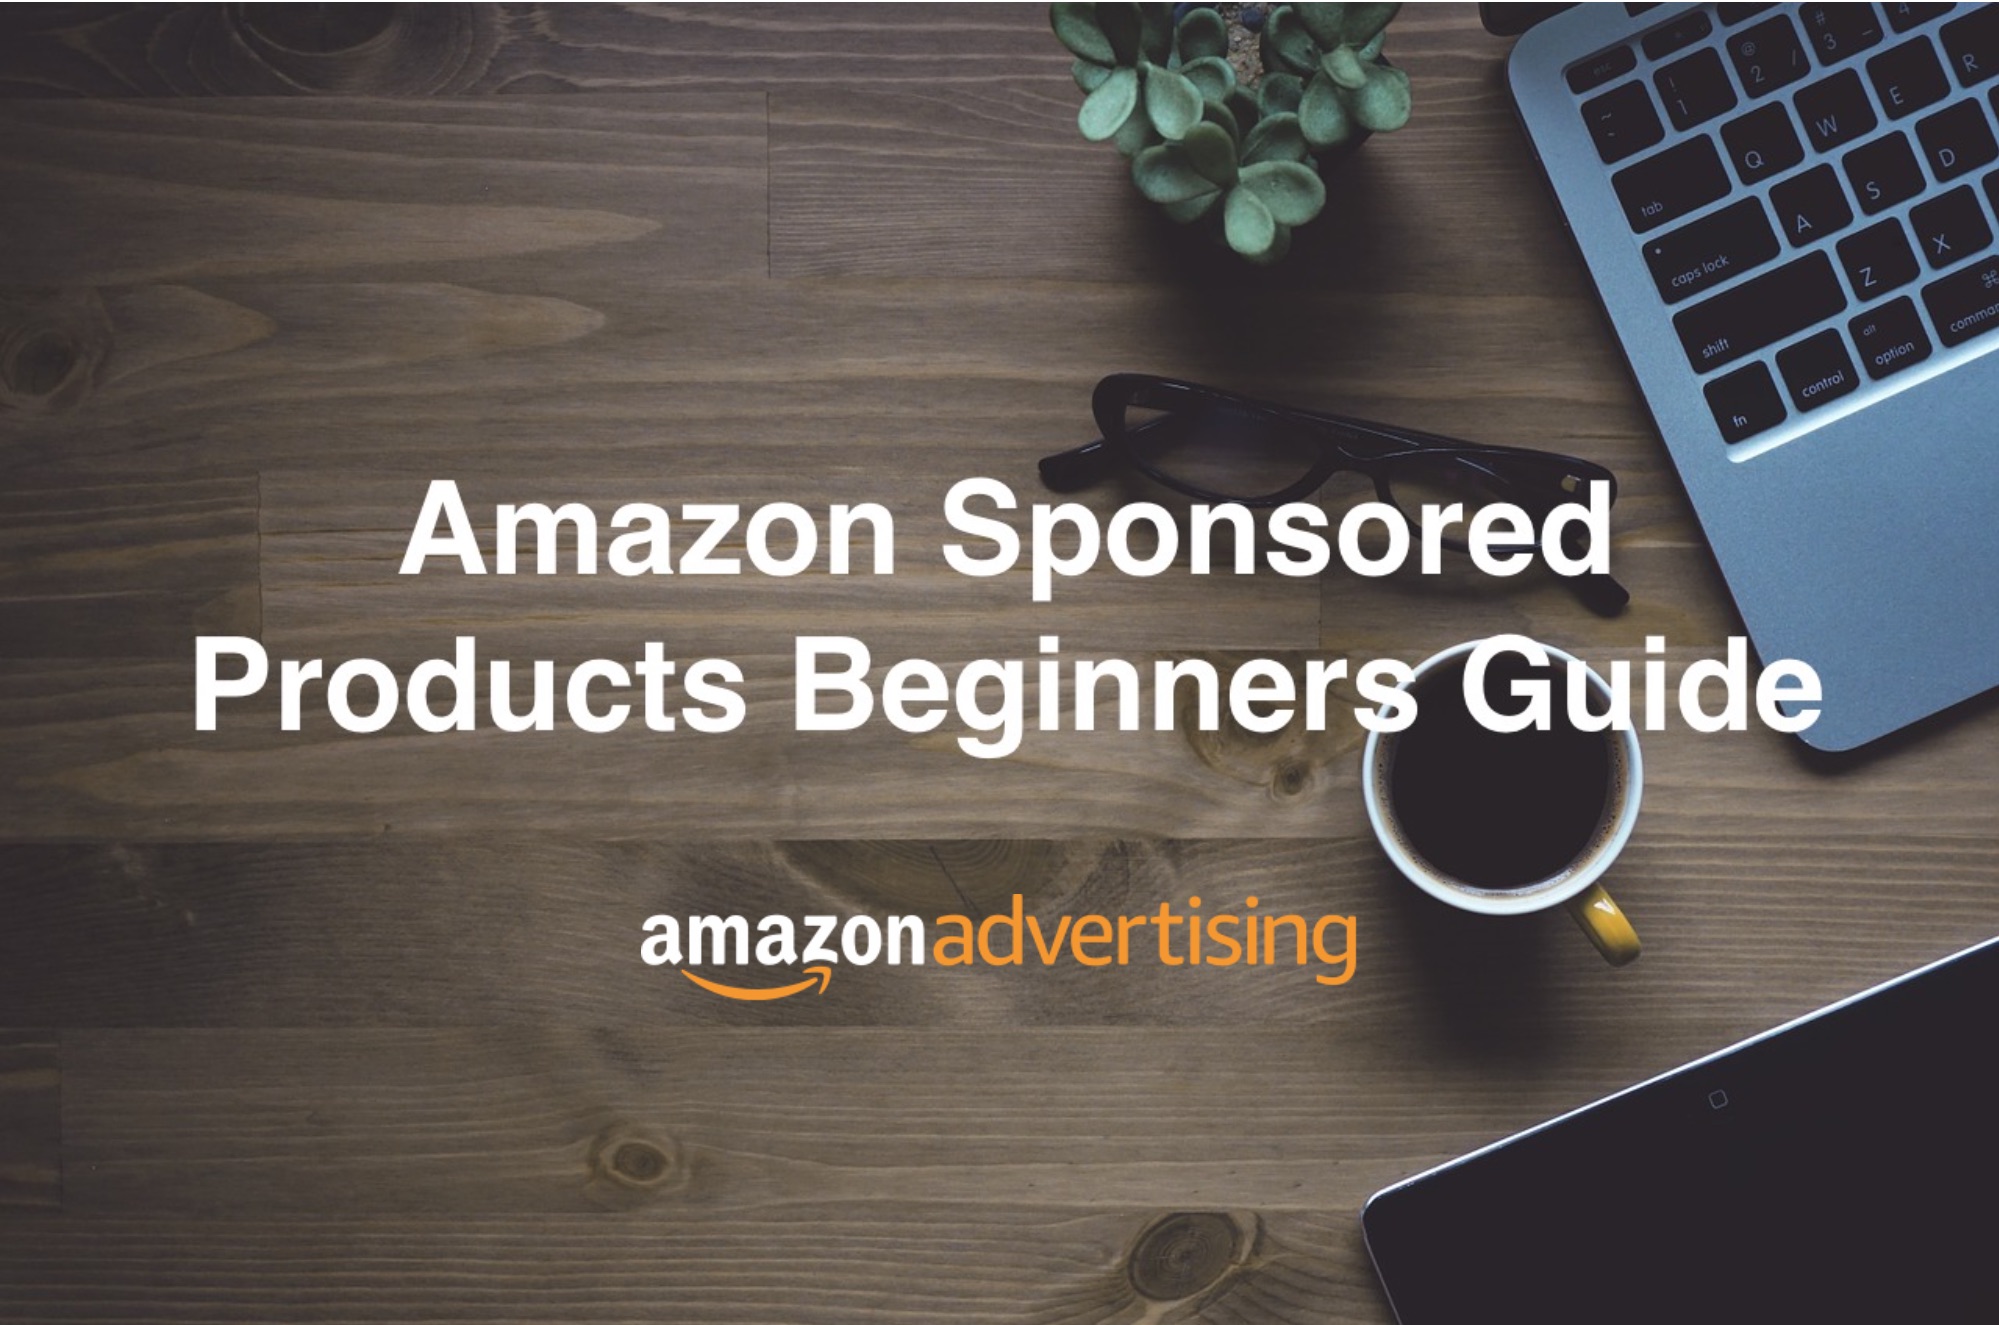 Amazon ppc sponsored products advertising beginners guide